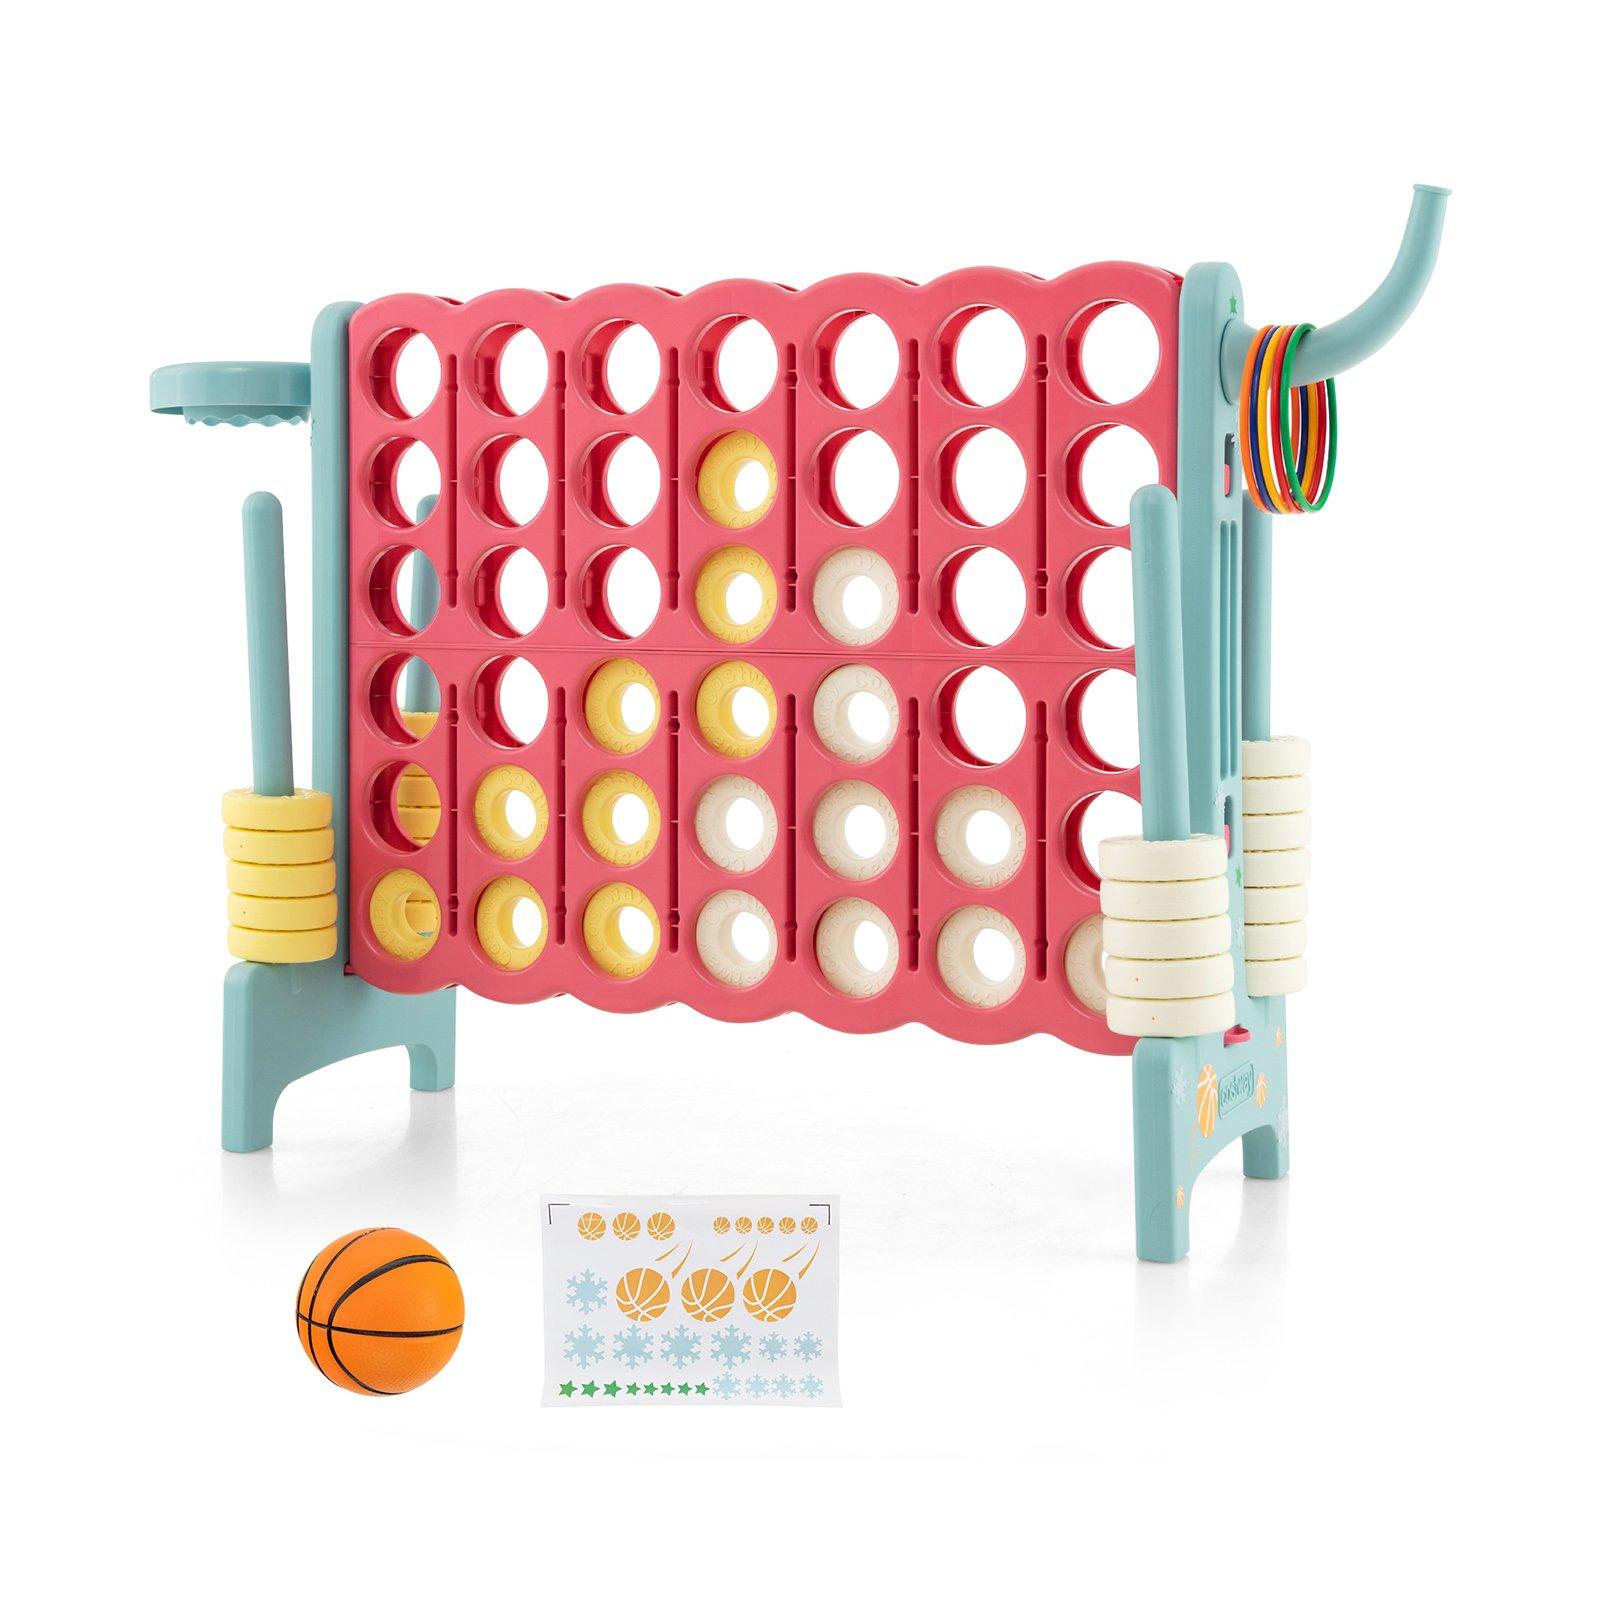 Upgraded 4-to-Score Game Set with Basketball Hoop and Toss Ring for Kids and Adults